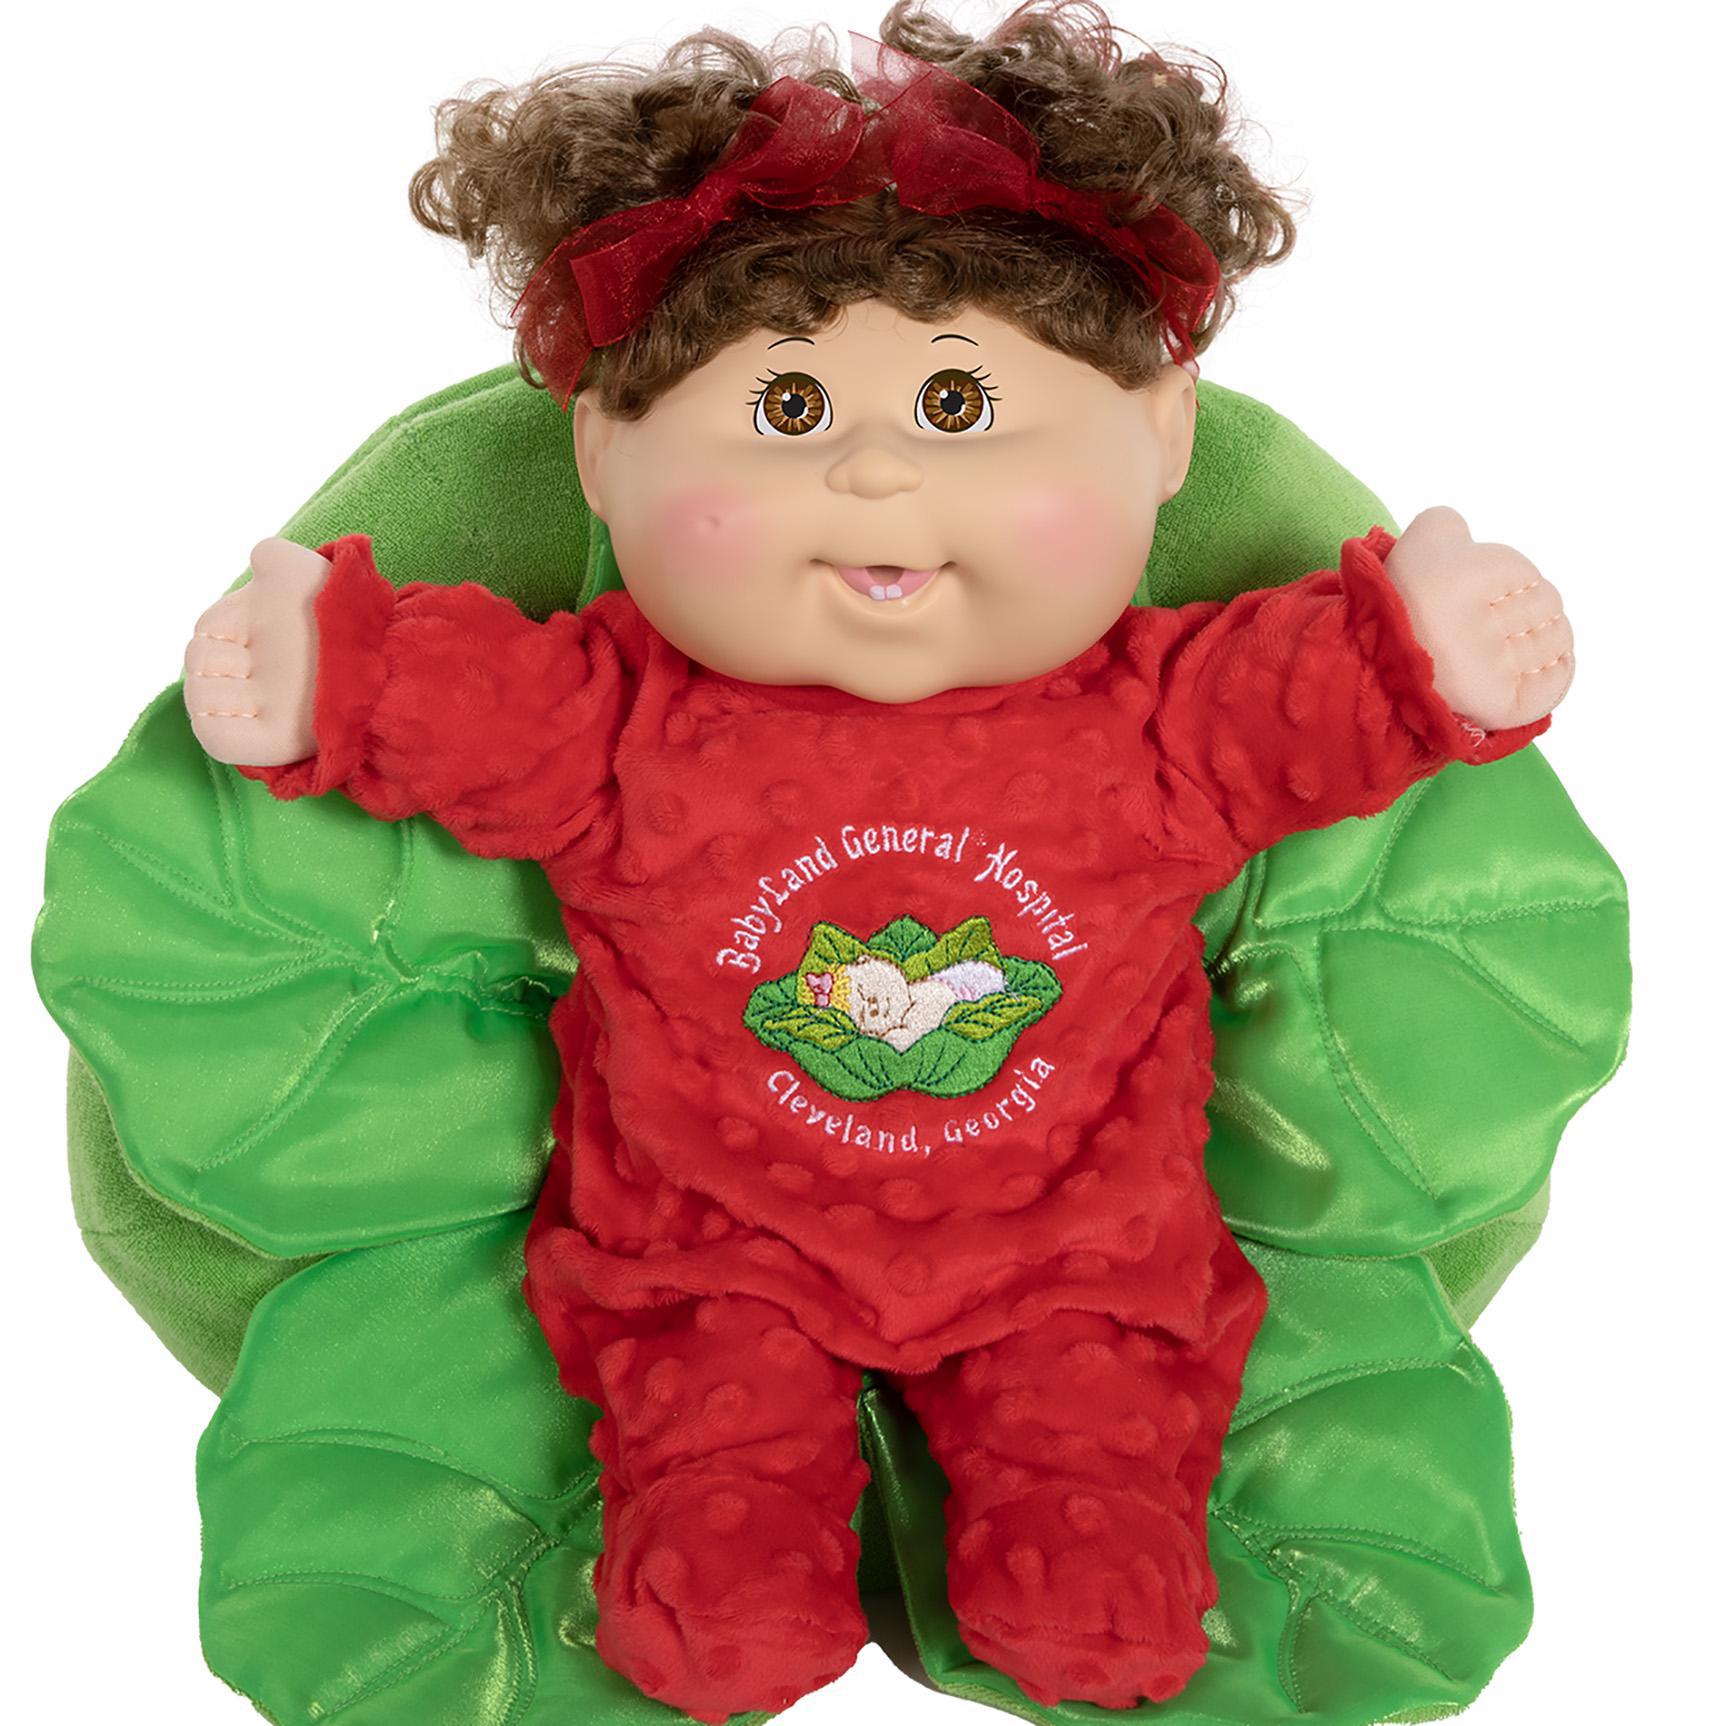 CPW1092-Red Minky CPK Cabbage Sleeper